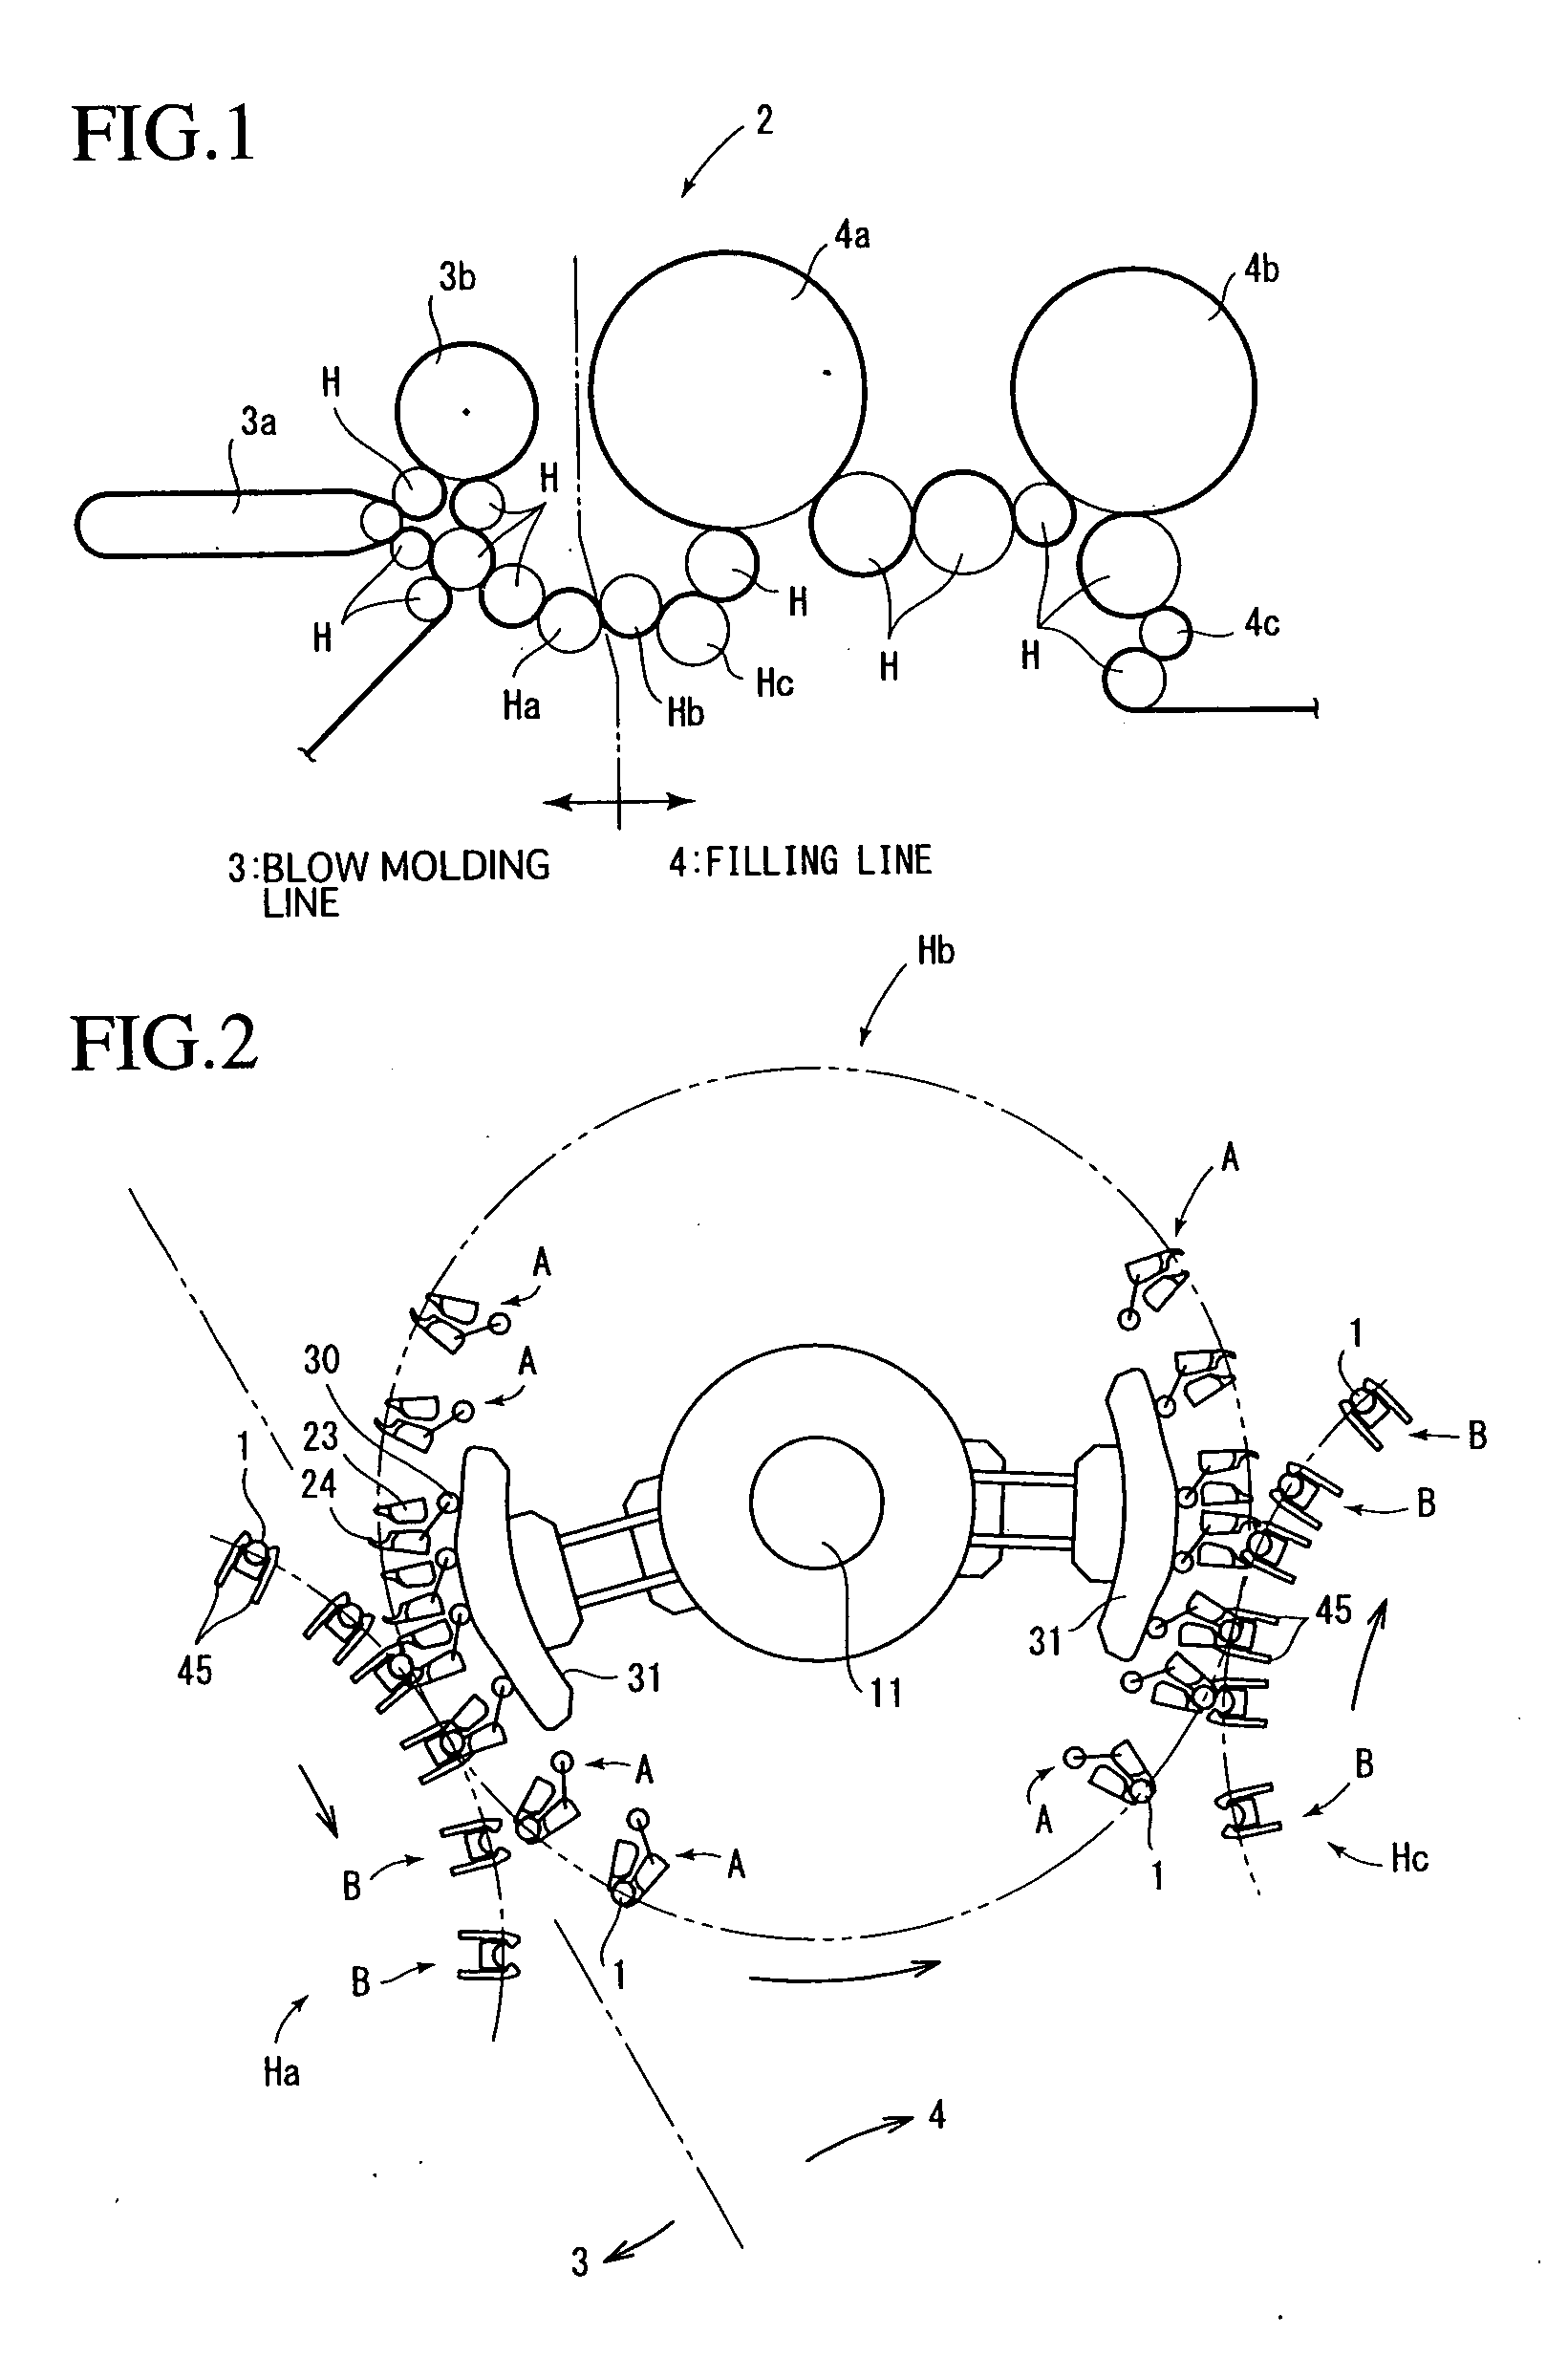 Article conveying device